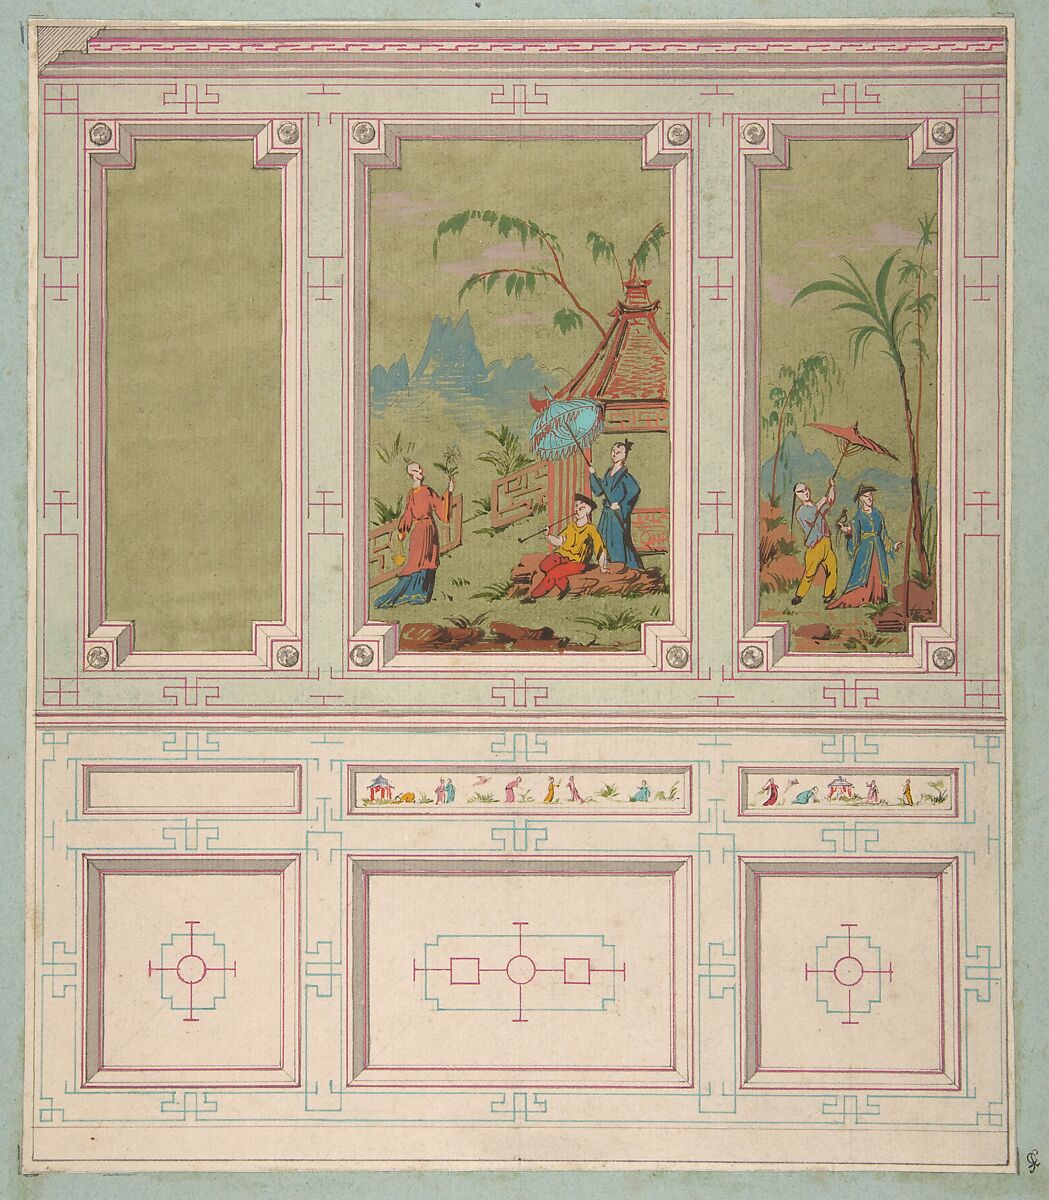 Design for wall panels decorated with Chinoiserie scenes, Jules-Edmond-Charles Lachaise (French, died 1897), Graphite and watercolor 